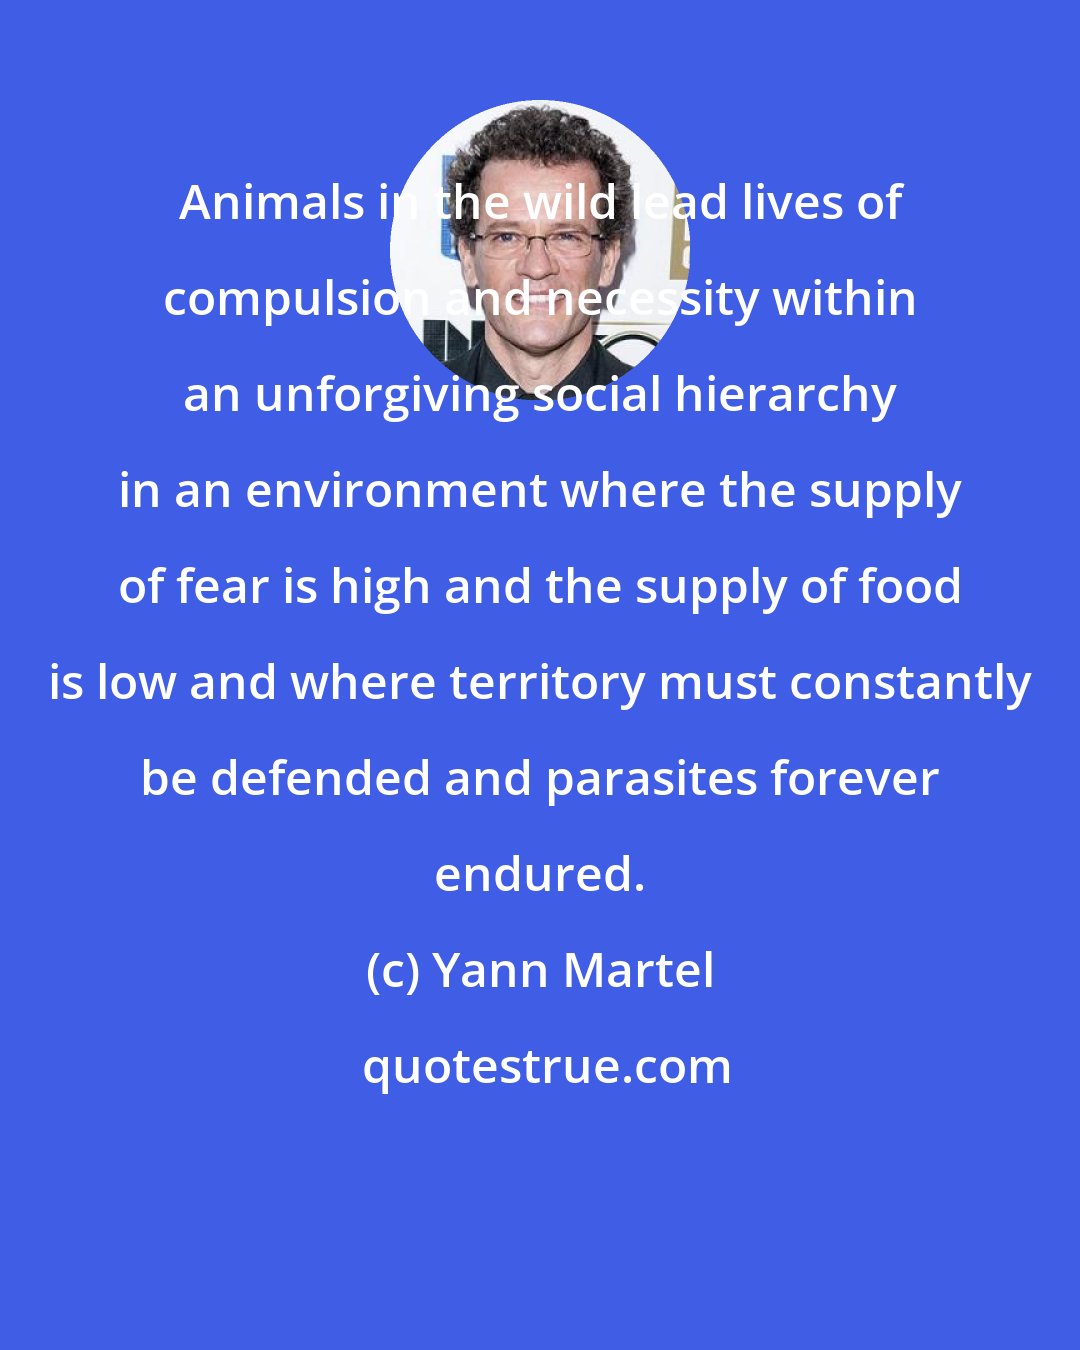 Yann Martel: Animals in the wild lead lives of compulsion and necessity within an unforgiving social hierarchy in an environment where the supply of fear is high and the supply of food is low and where territory must constantly be defended and parasites forever endured.